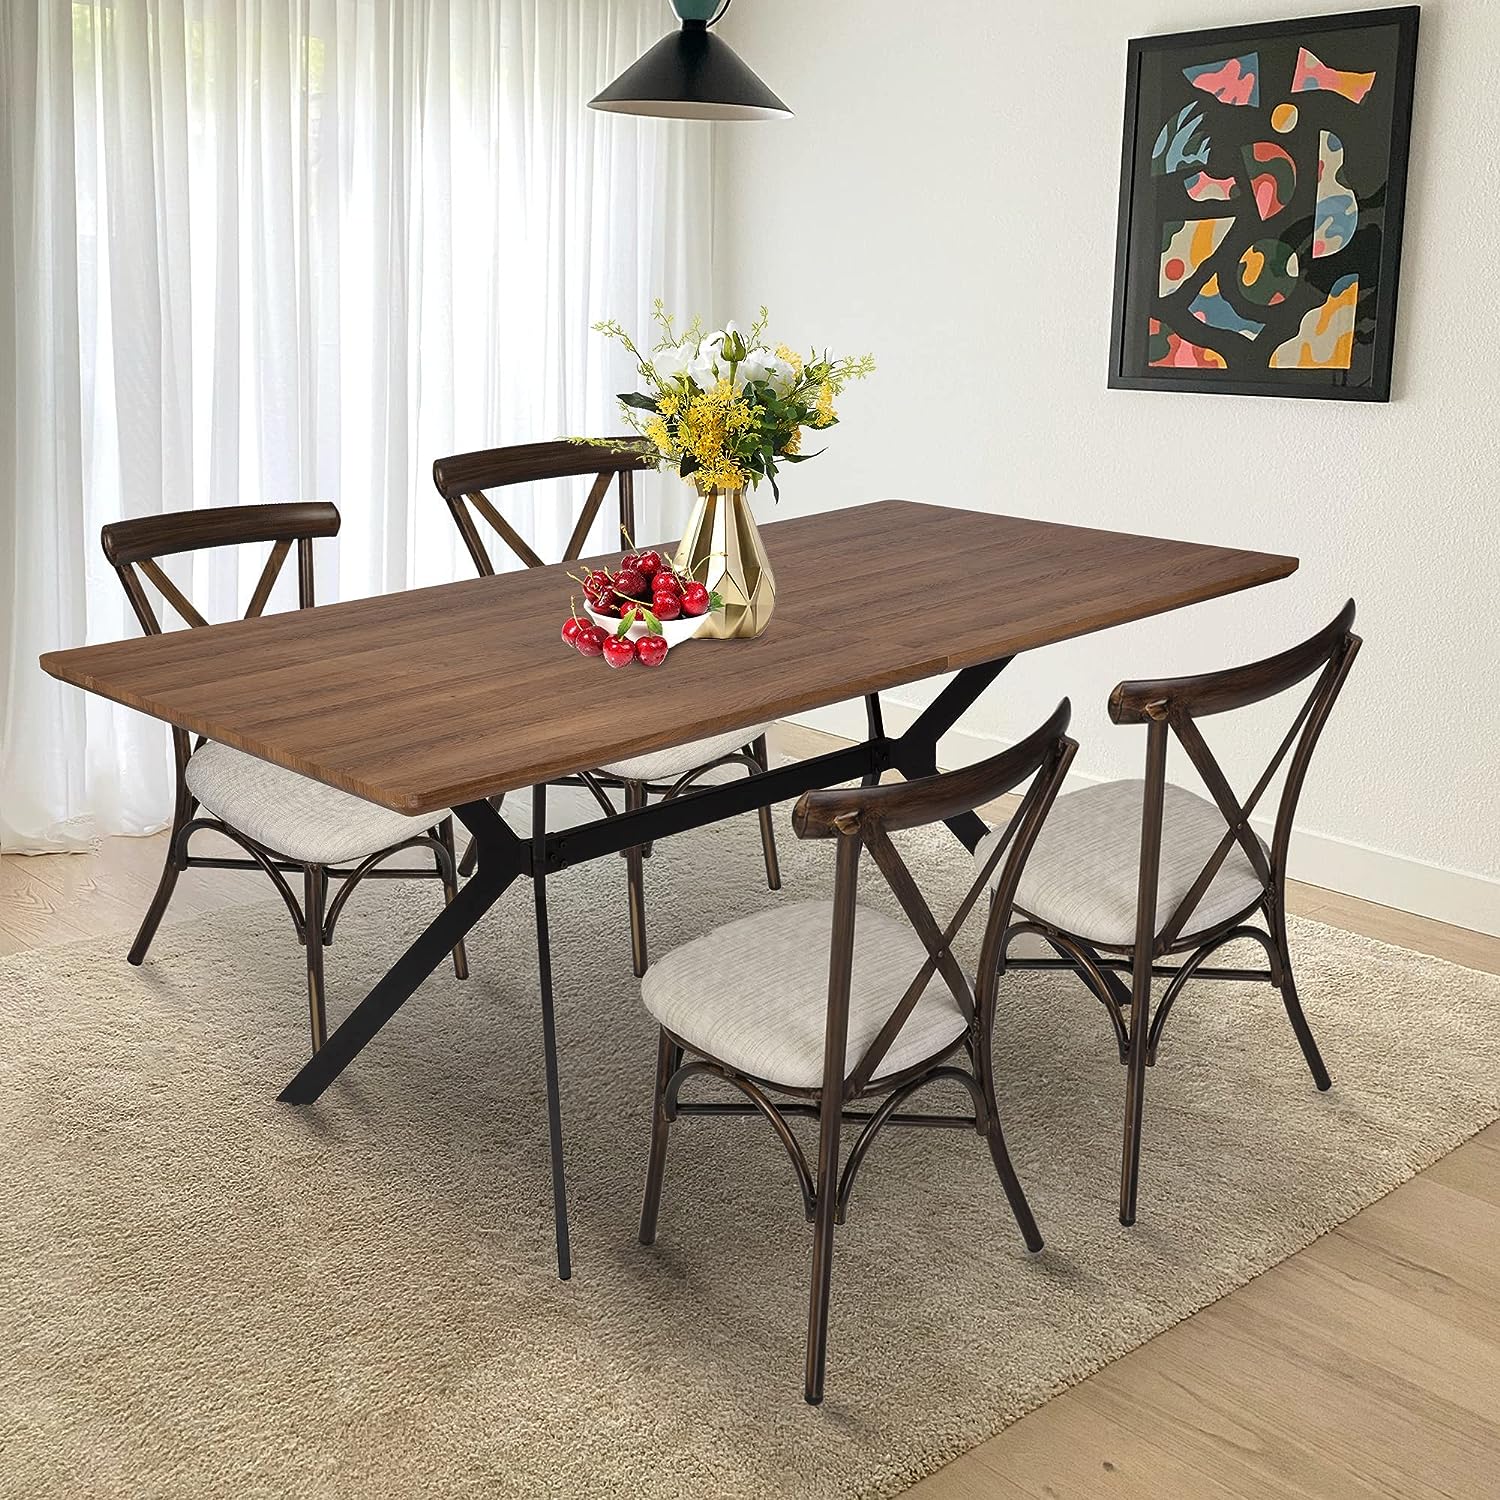 Dining Table Mid-Century Vintage Kitchen Table for Living Room Balcony Cafe Bar, Walnut